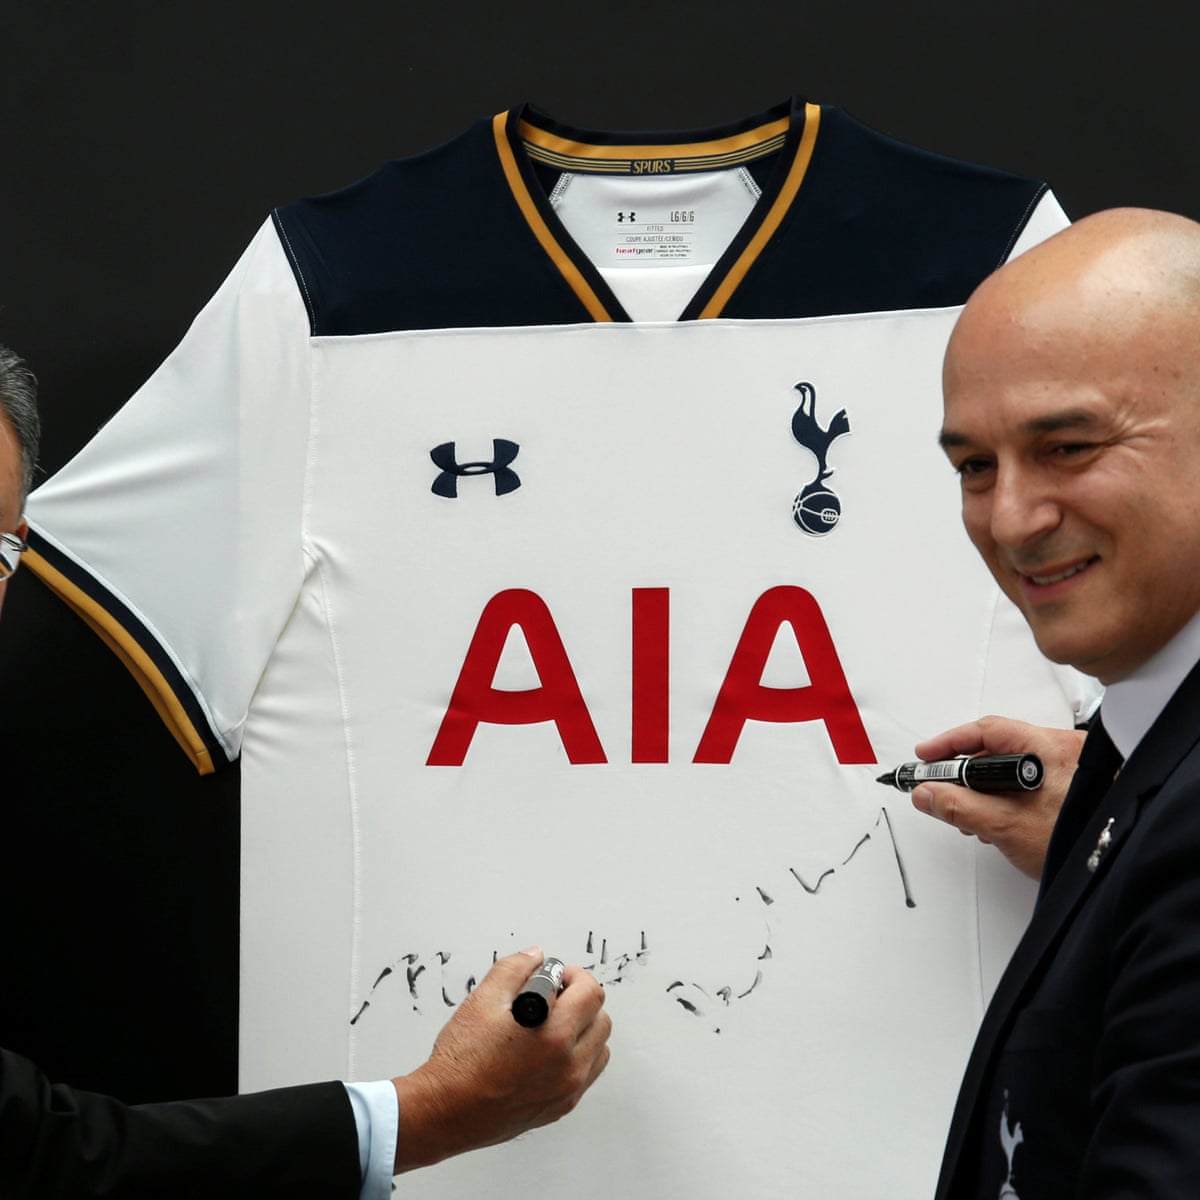 AIA sponsorship is stain on Spurs shirts, say Kick Out Coal